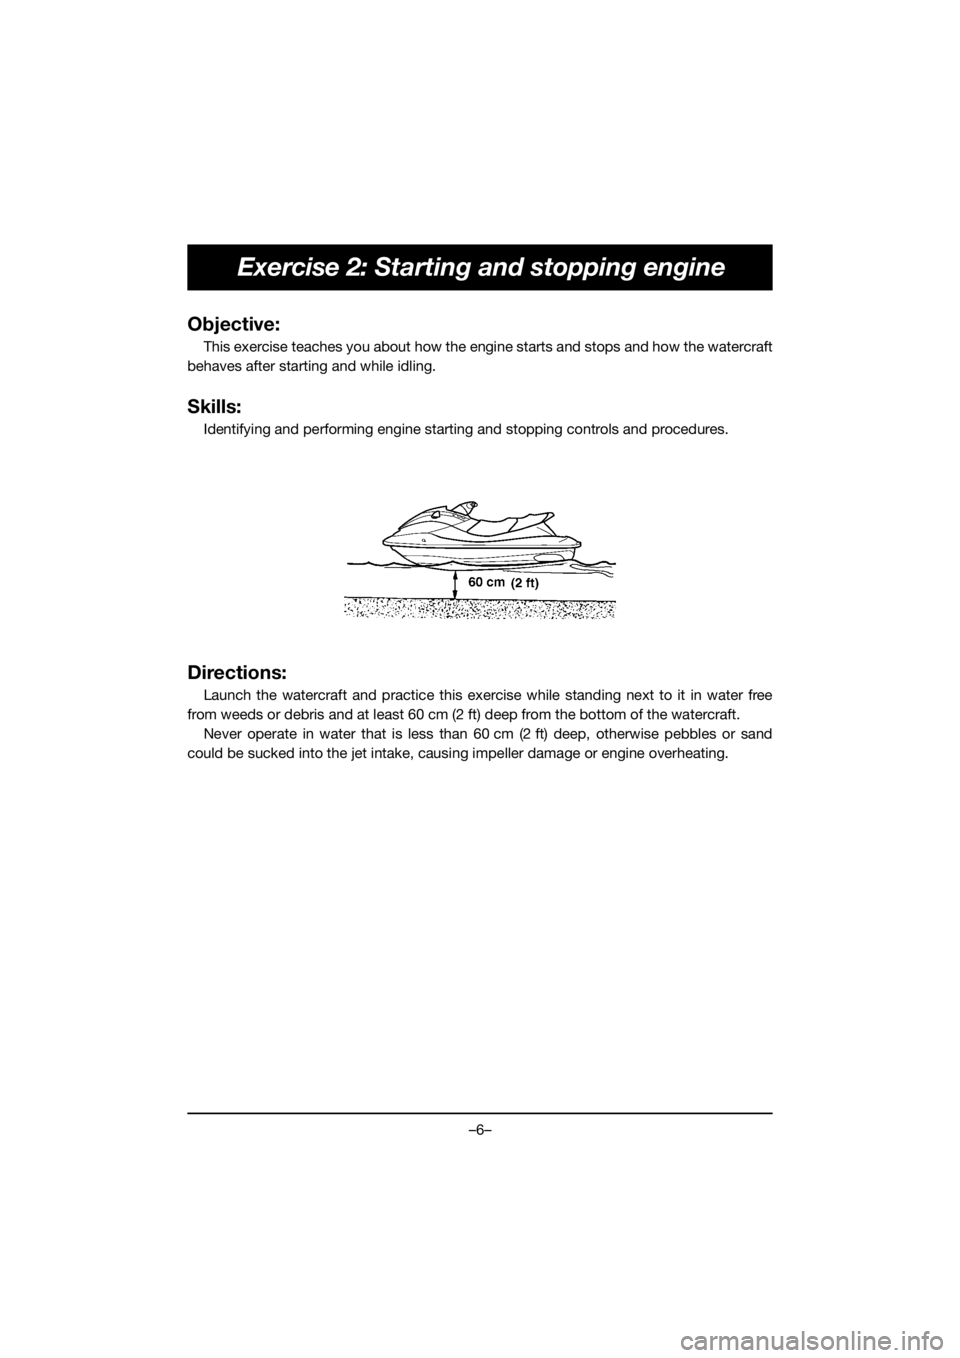 YAMAHA FX HO 2018  ΟΔΗΓΌΣ ΧΡΉΣΗΣ (in Greek) –6–
Exercise 2: Starting and stopping engine
Objective:
This exercise teaches you about how the engine starts and stops and how the watercraft
behaves after starting and while idling.
Skills:
Iden